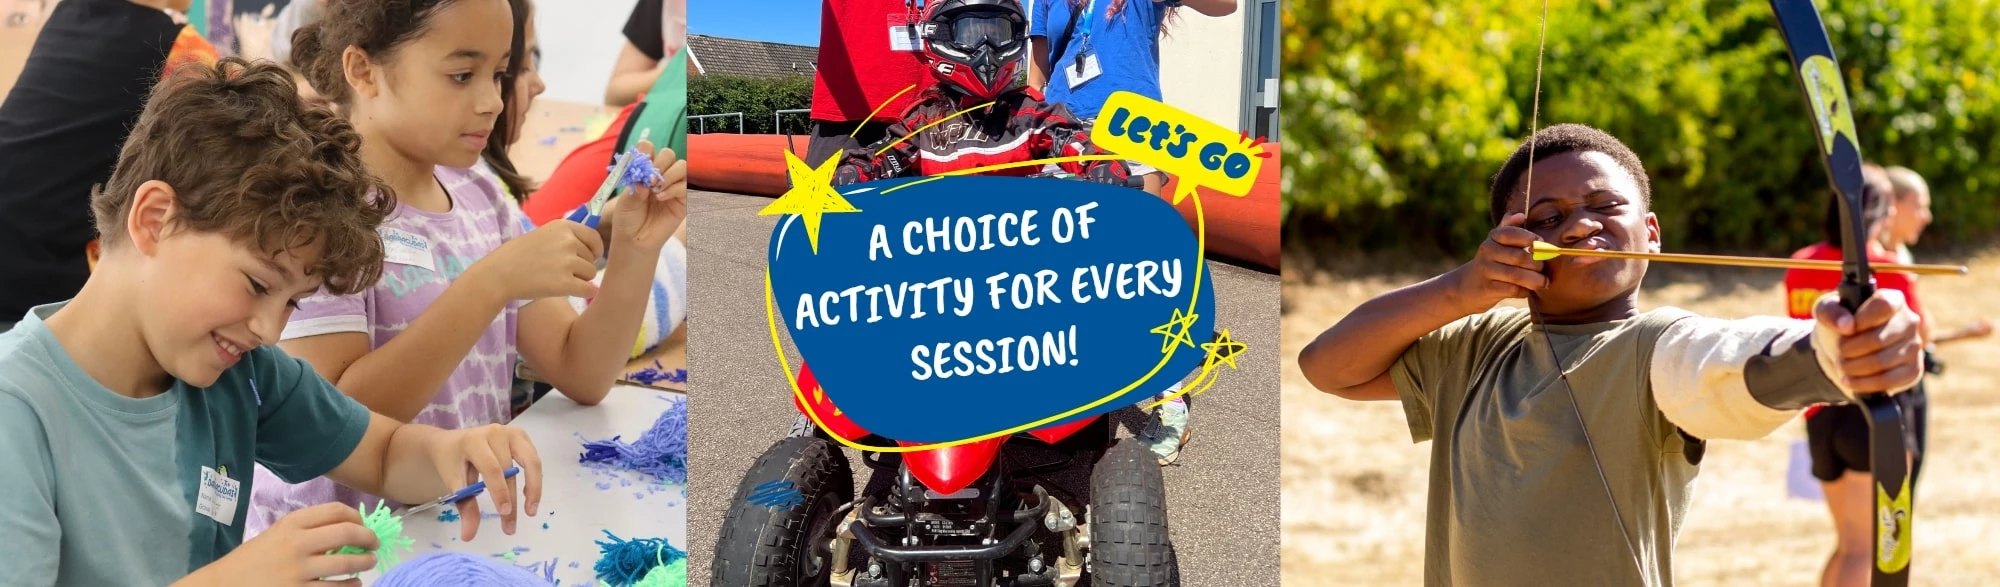 School holiday camps with a choice of activities